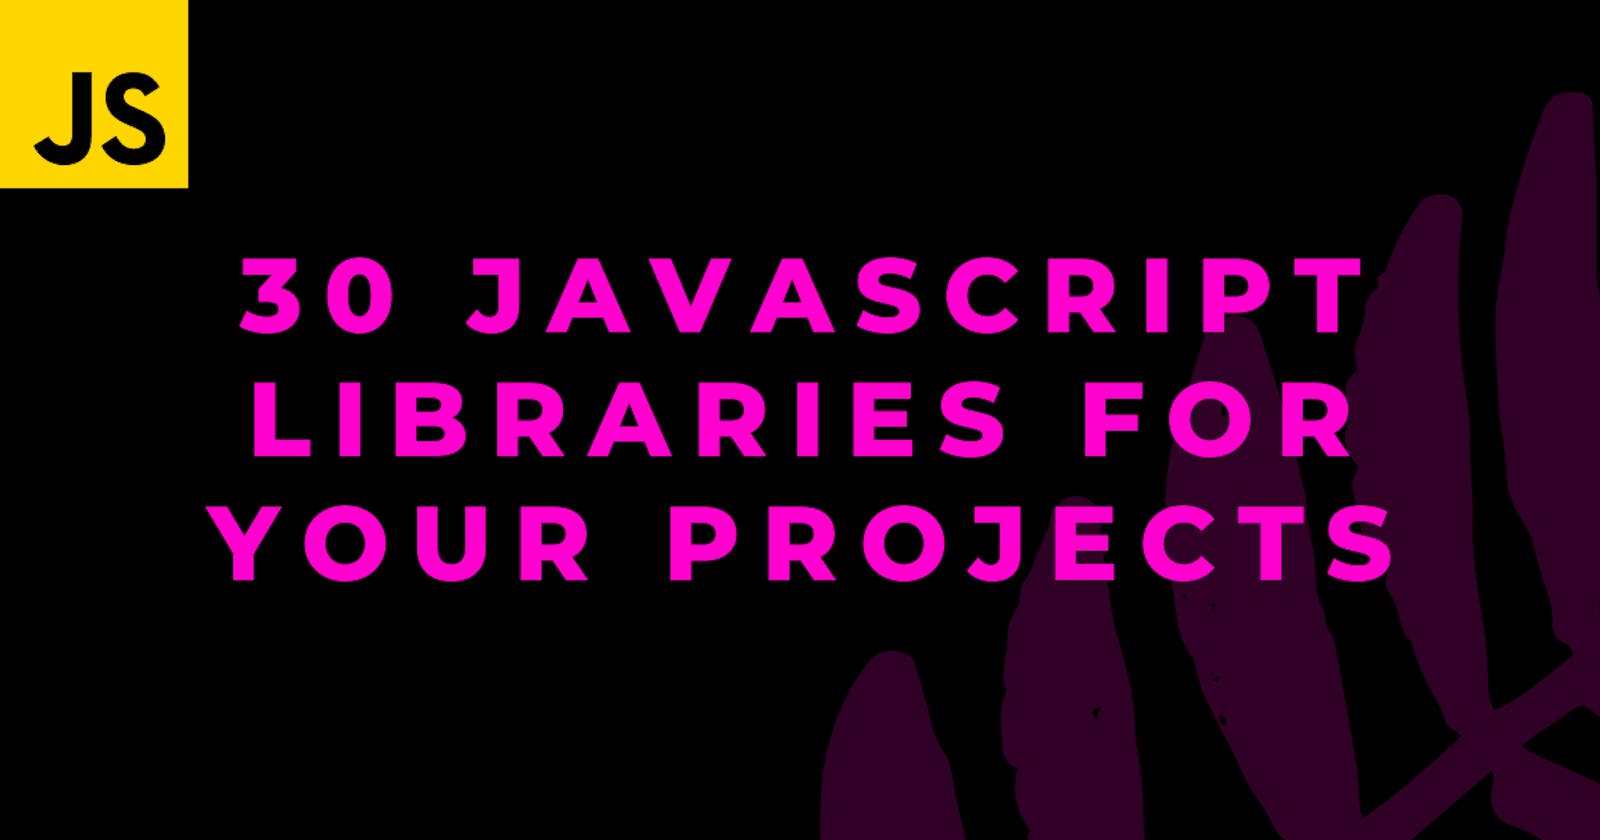 30 JavaScript Libraries to use in your Projects